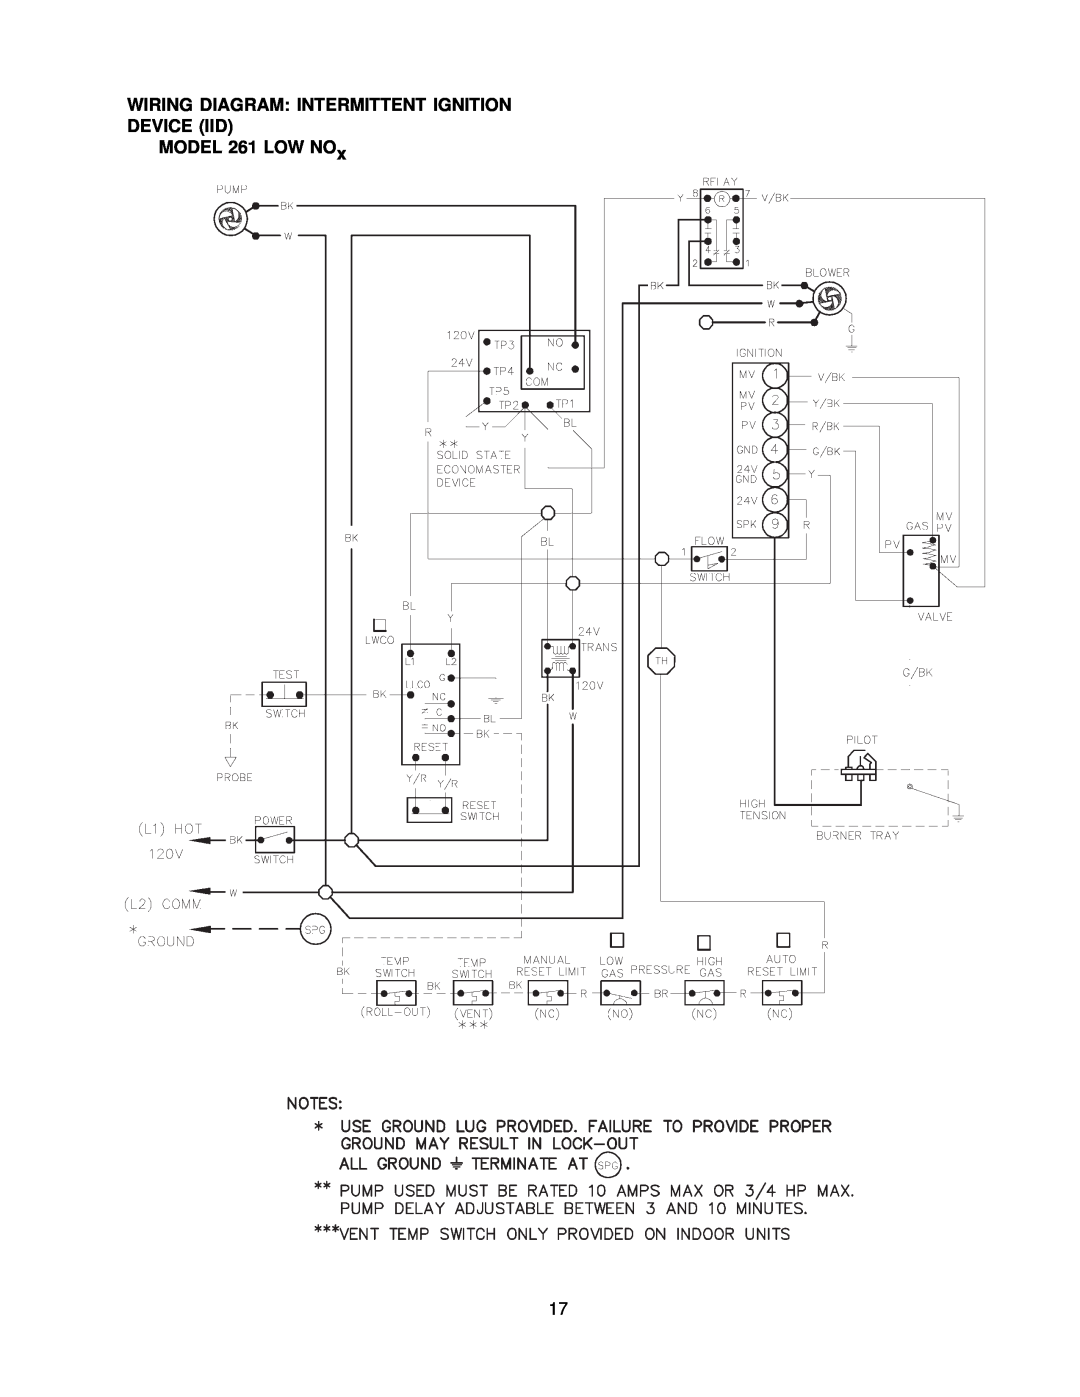 Raypak 260-401 manual Wiring Diagram Intermittent Ignition Device Iid, MODEL 261 LOW NOx 